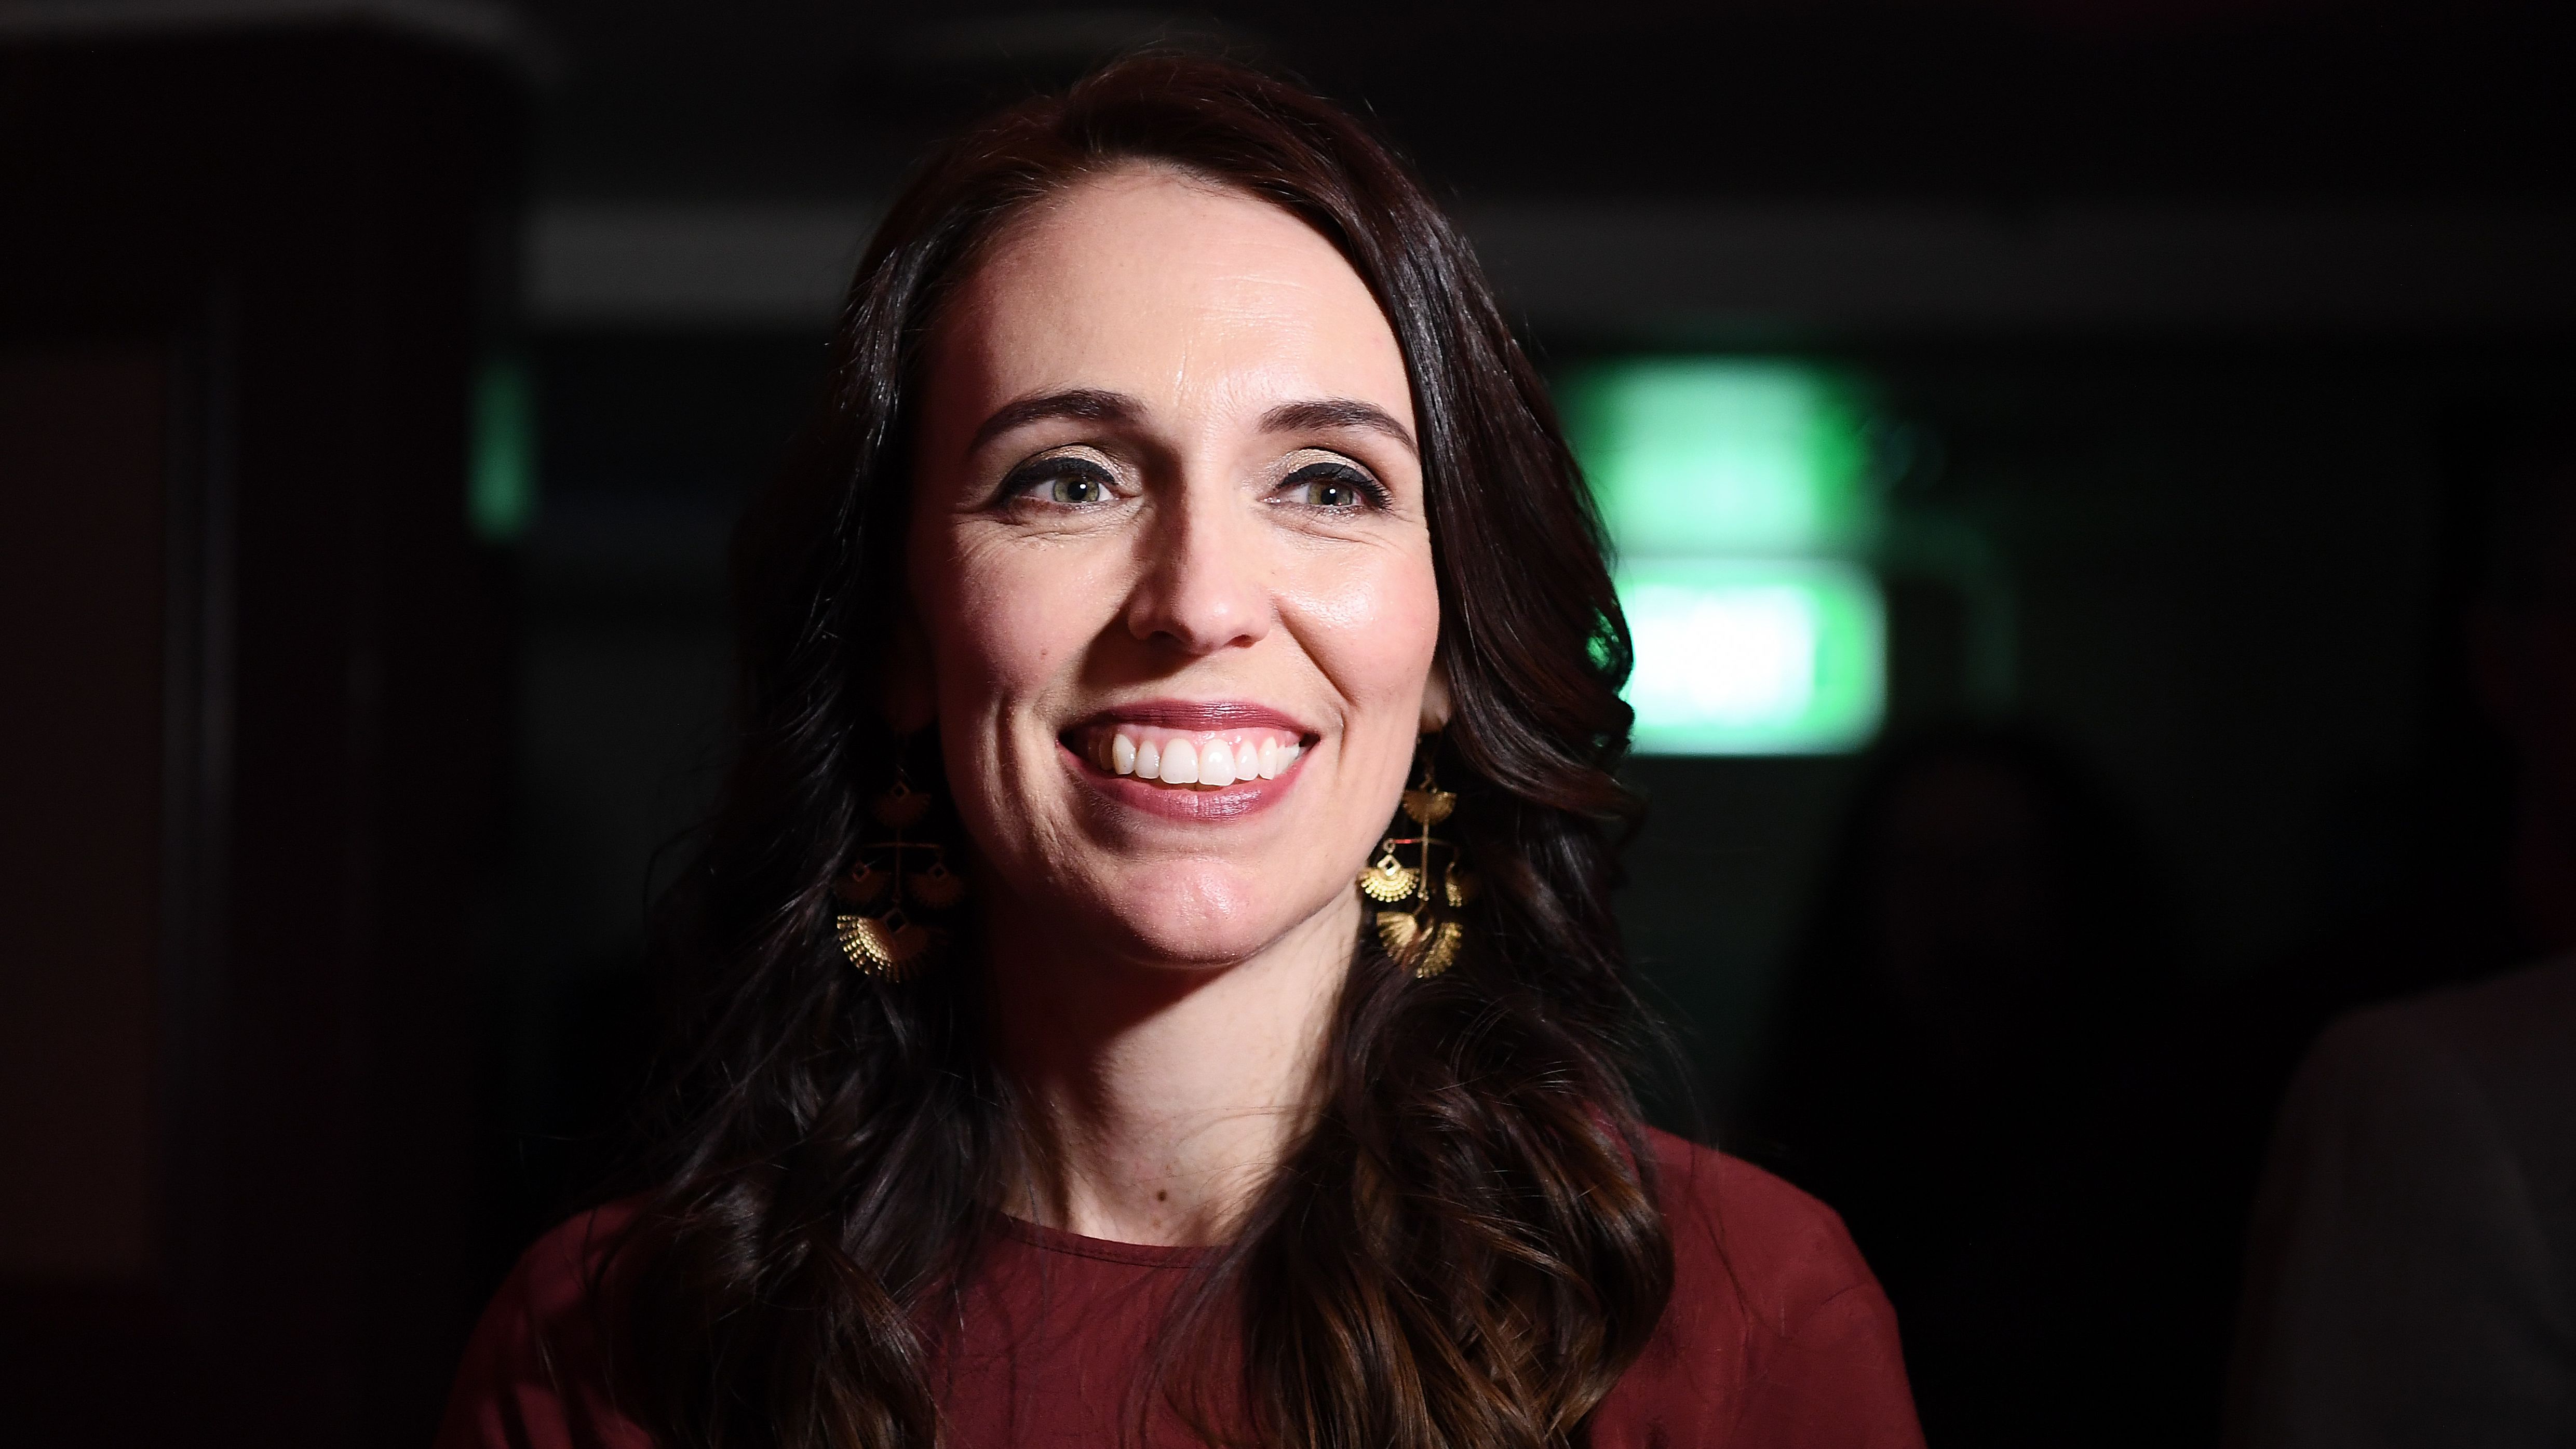 Labour Party leader and New Zealand Prime Minister Jacinda Ardern speaks to media after claiming victory during the Labor Party Election Night Function at Auckland Town Hall on October 17, 2020 in Auckland, New Zealand. 